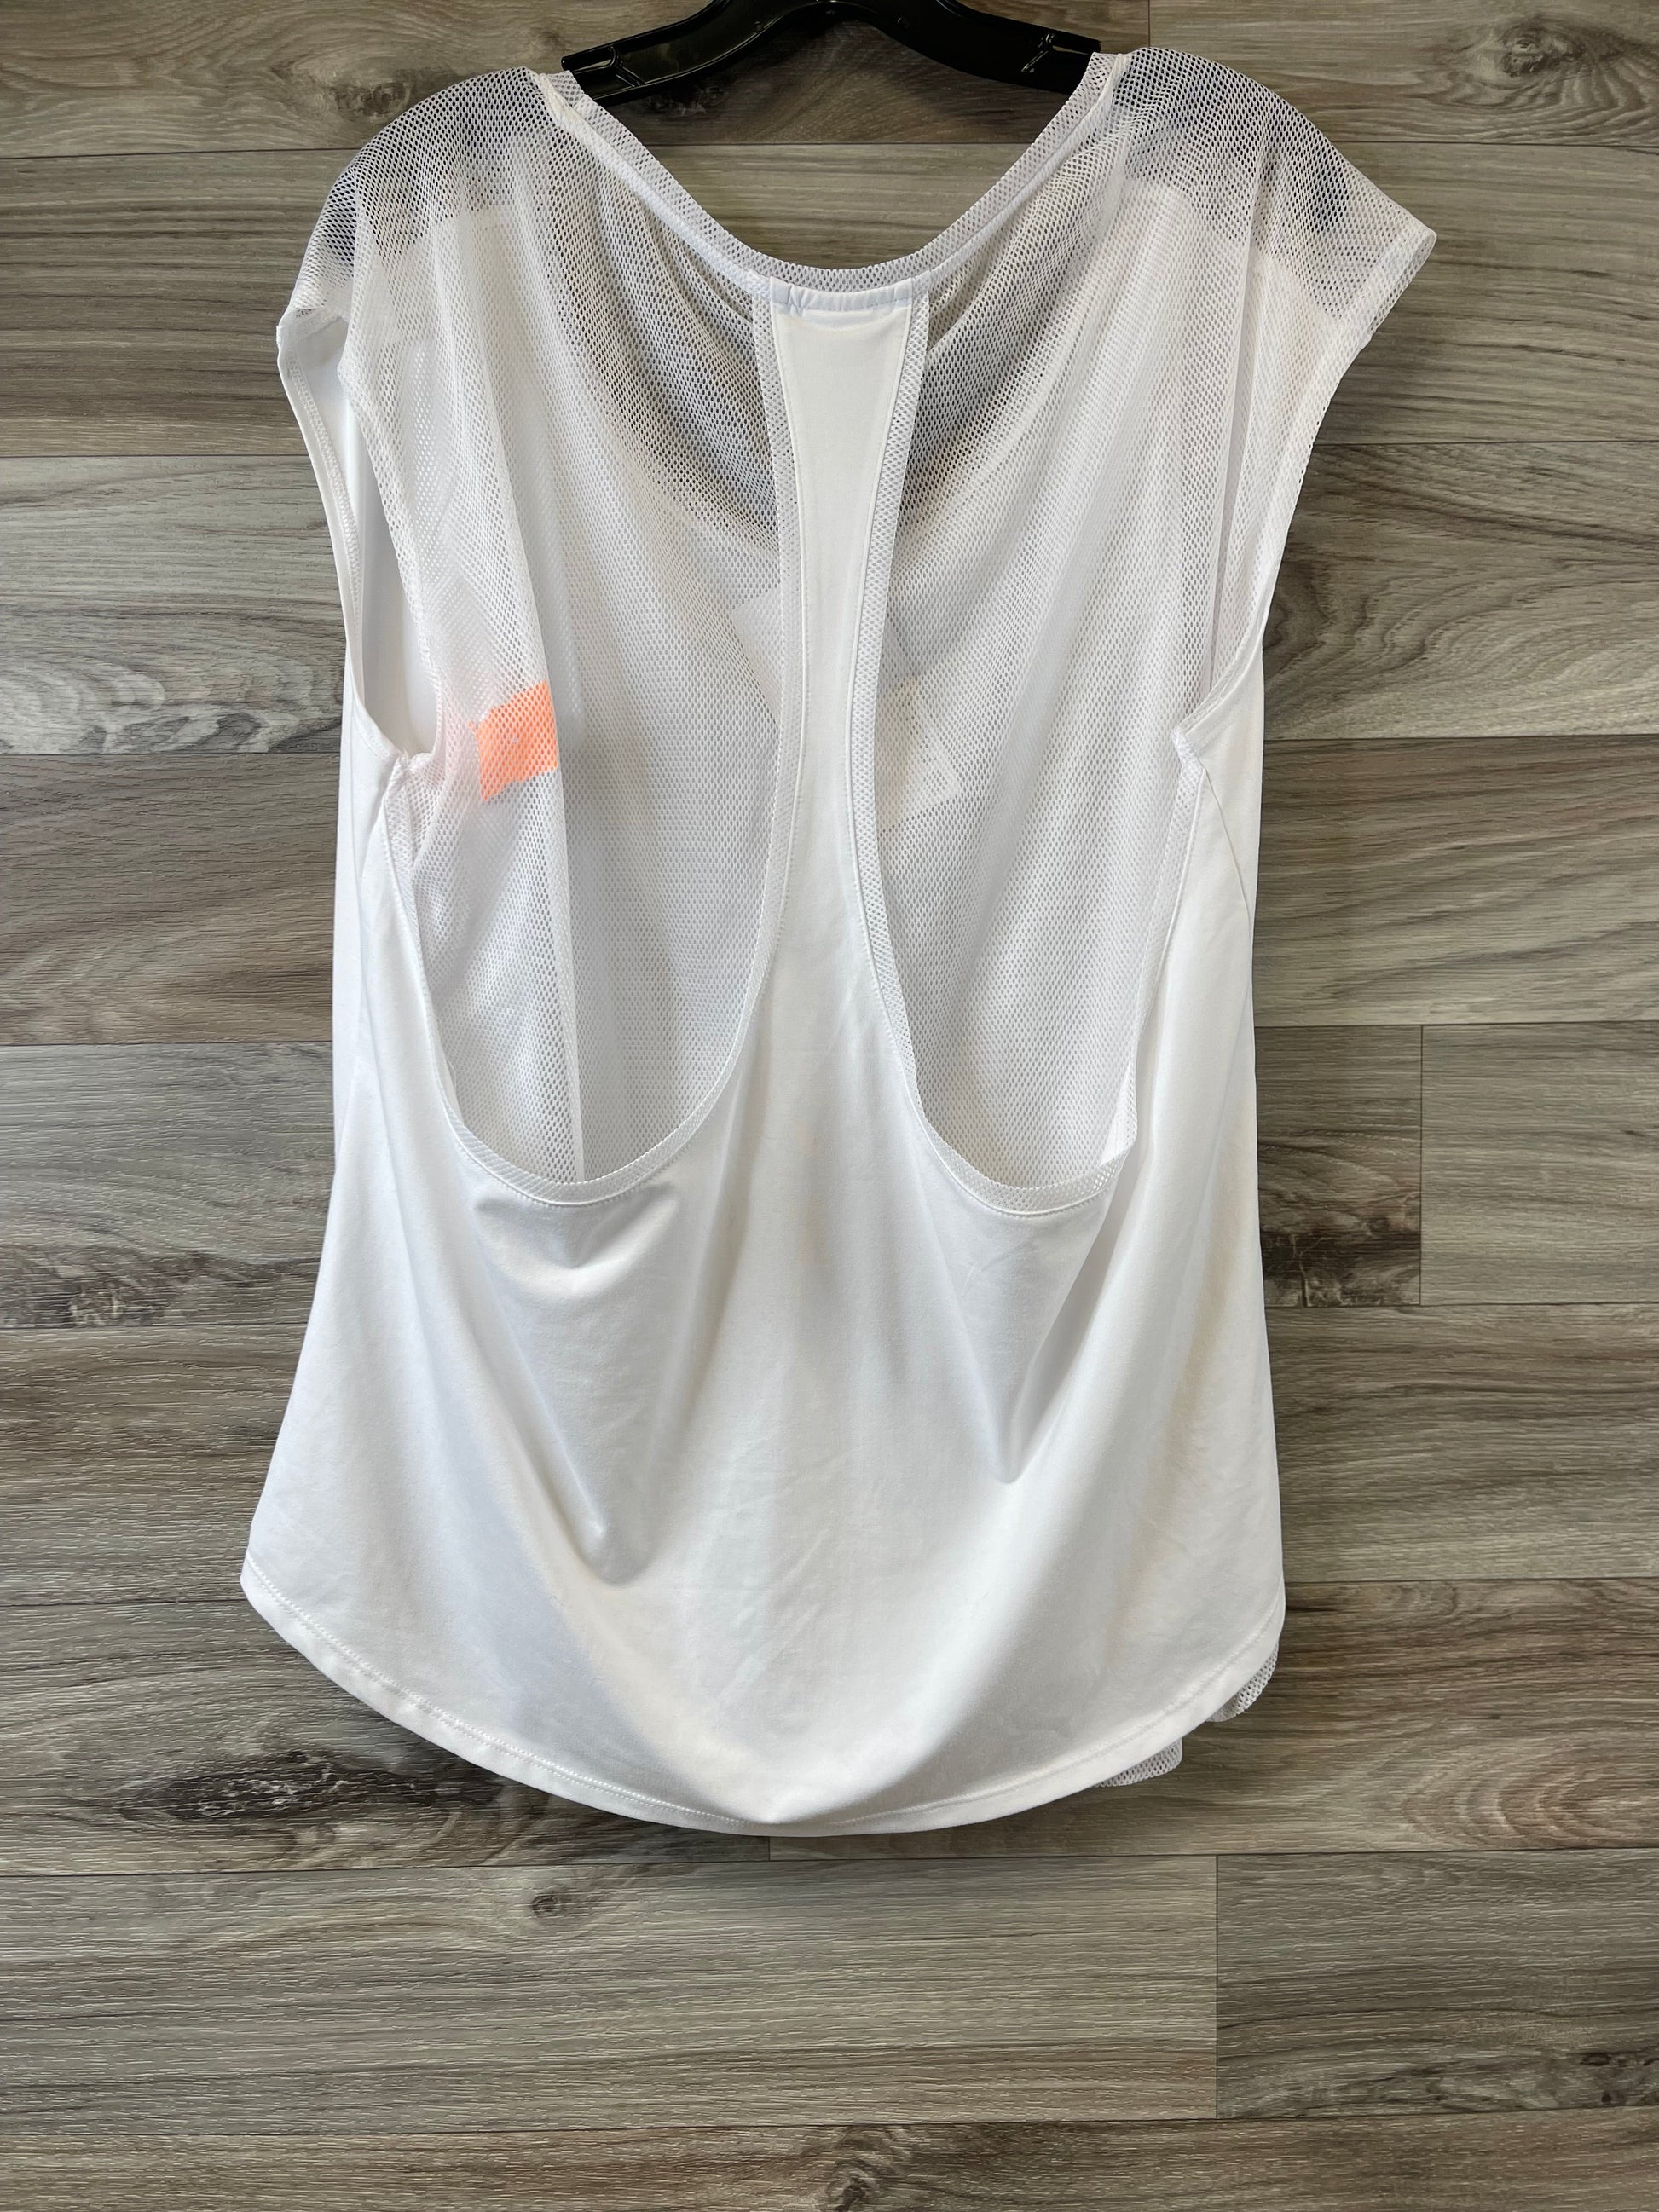 Athletic Tank Top By Fabletics Size: Xxl